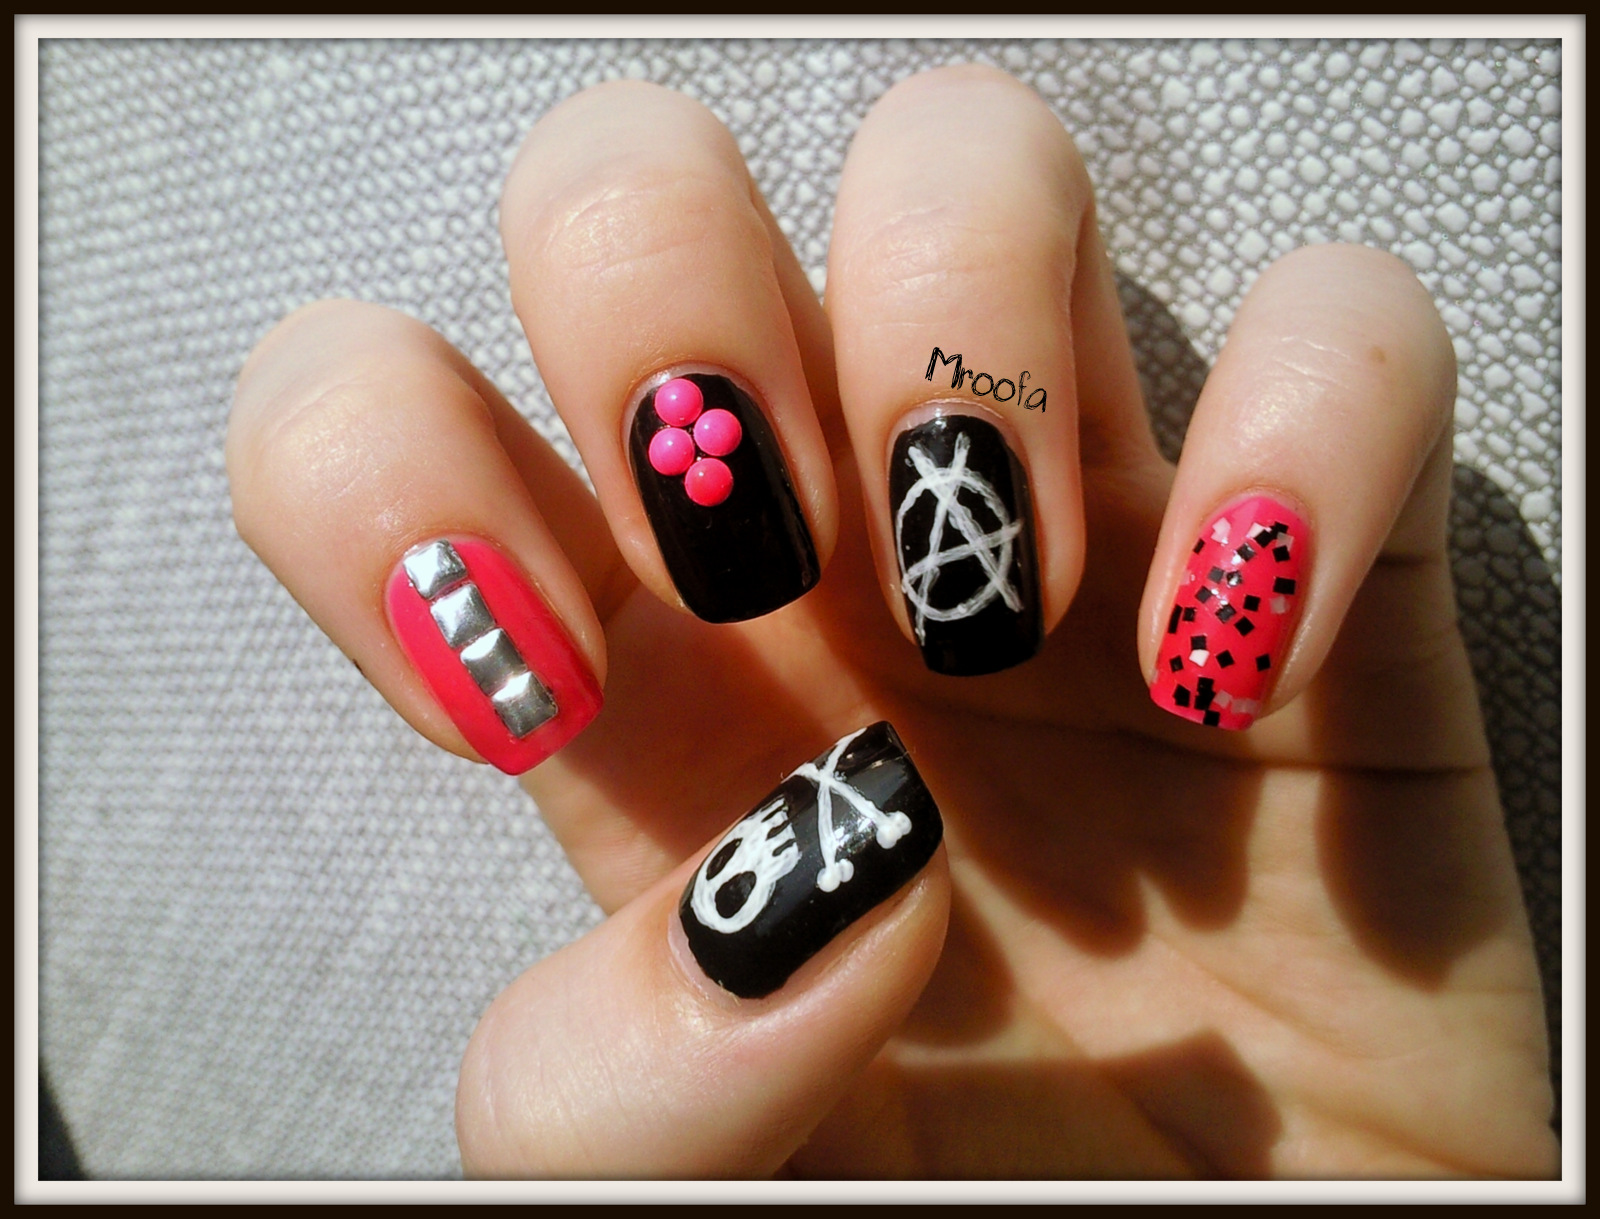 Edgy Punk Rock Nails - wide 2